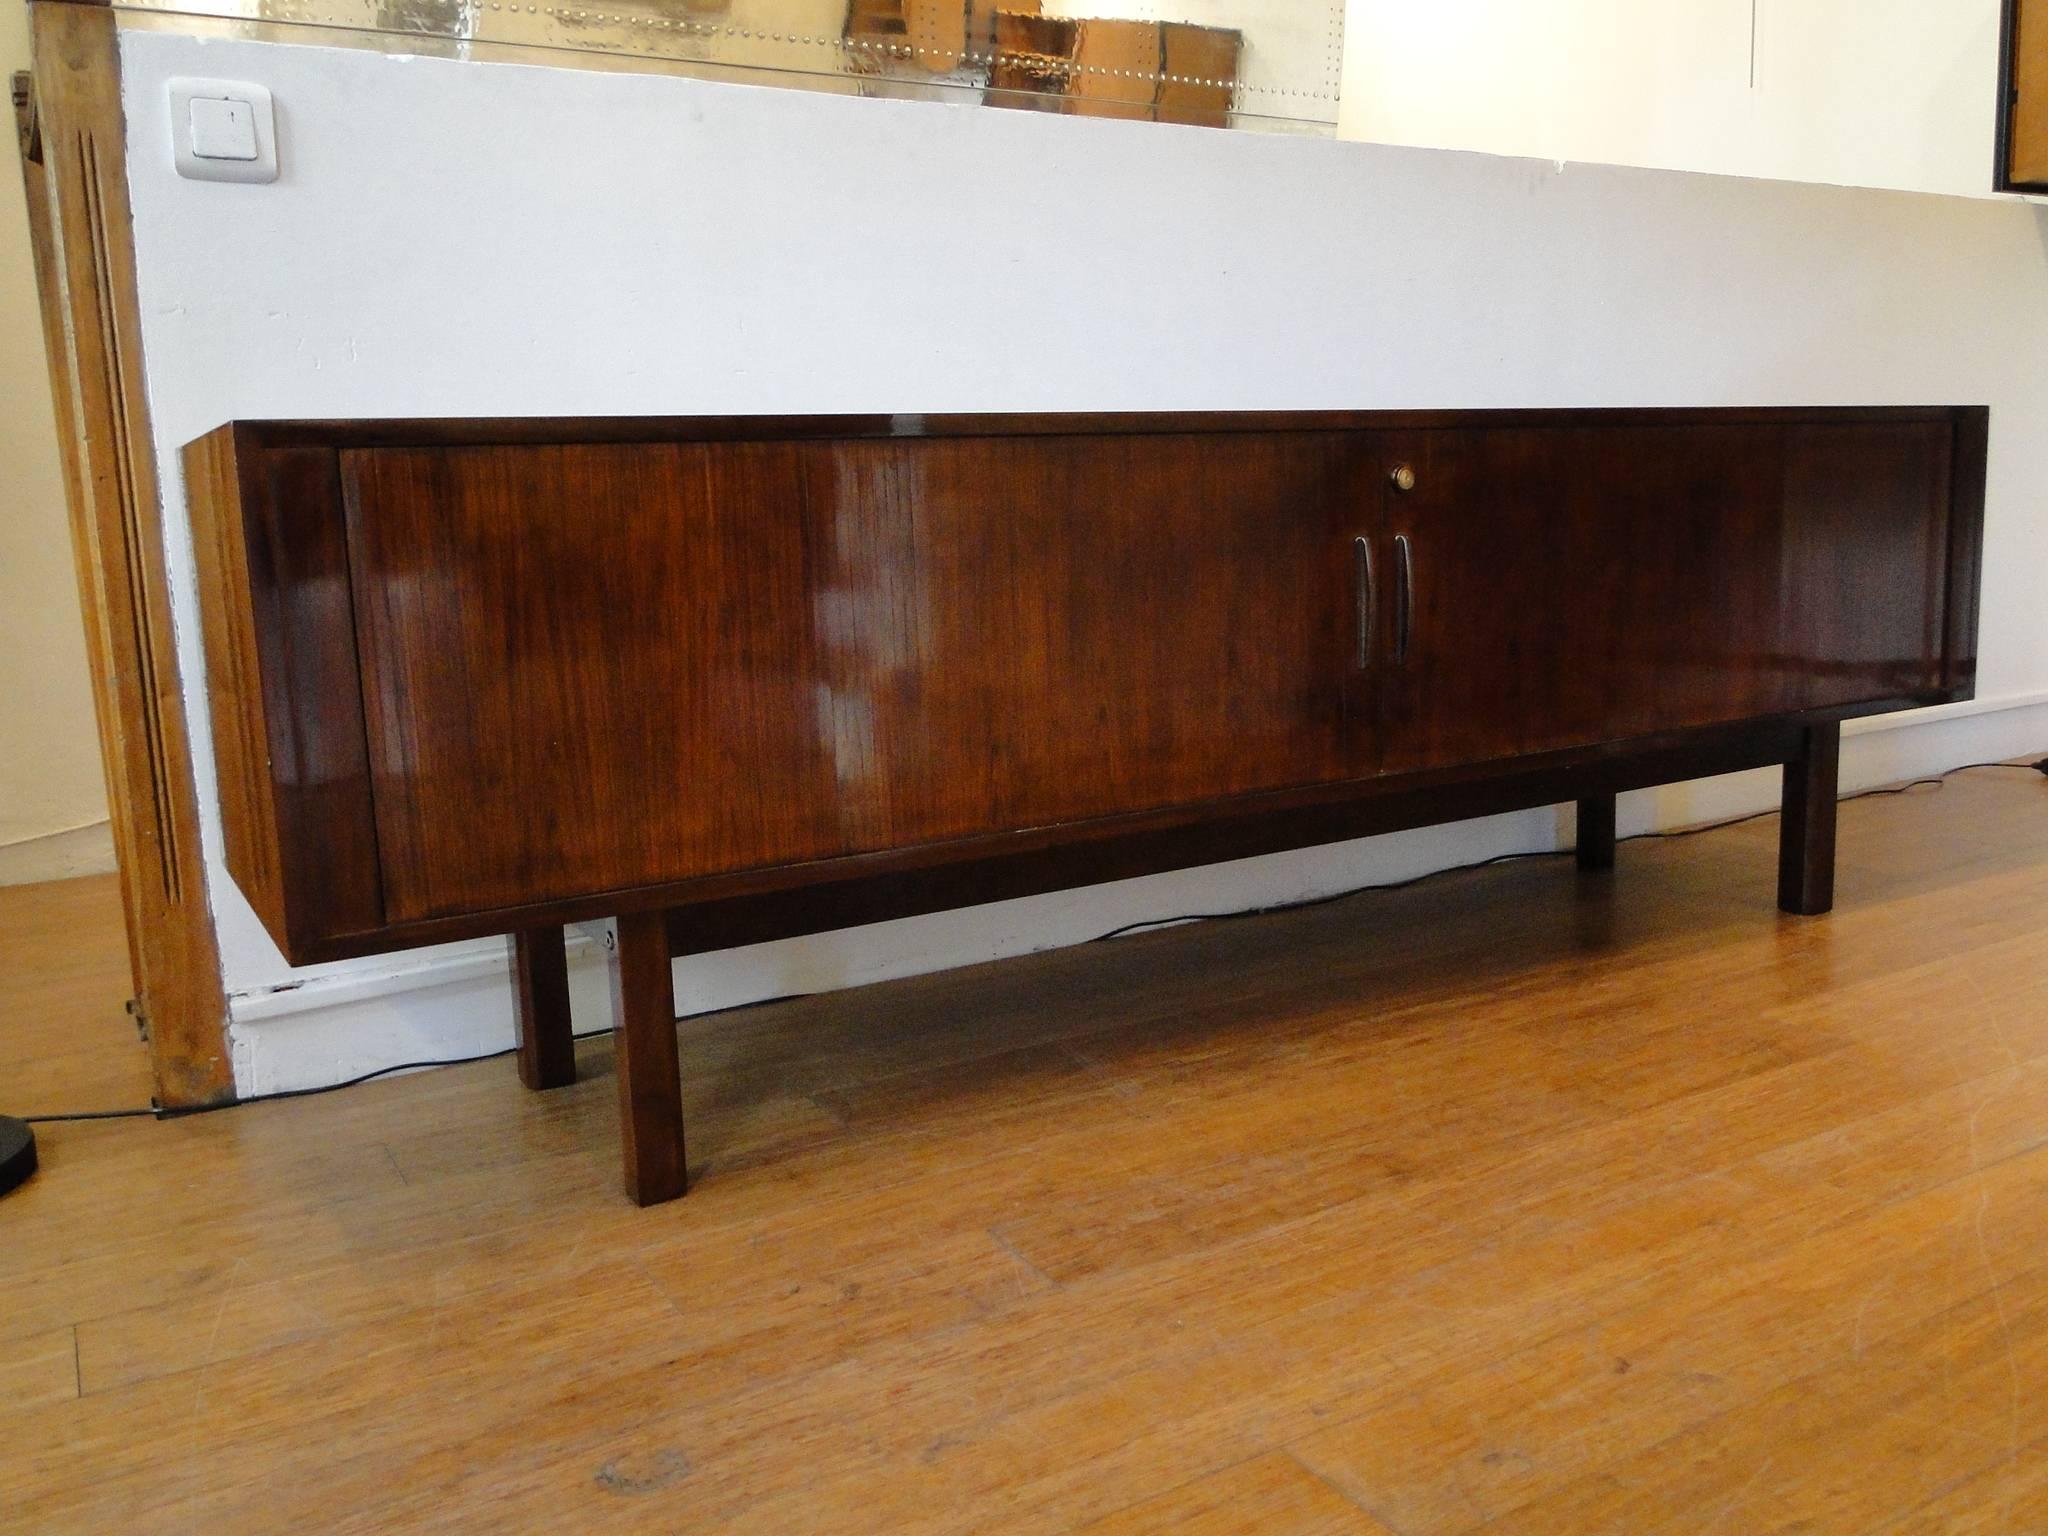 Brazilian rosewood tamboor door sideboard by Arne Vodder.

The back is also finished with Brazilian rosewood.
203 cm long.